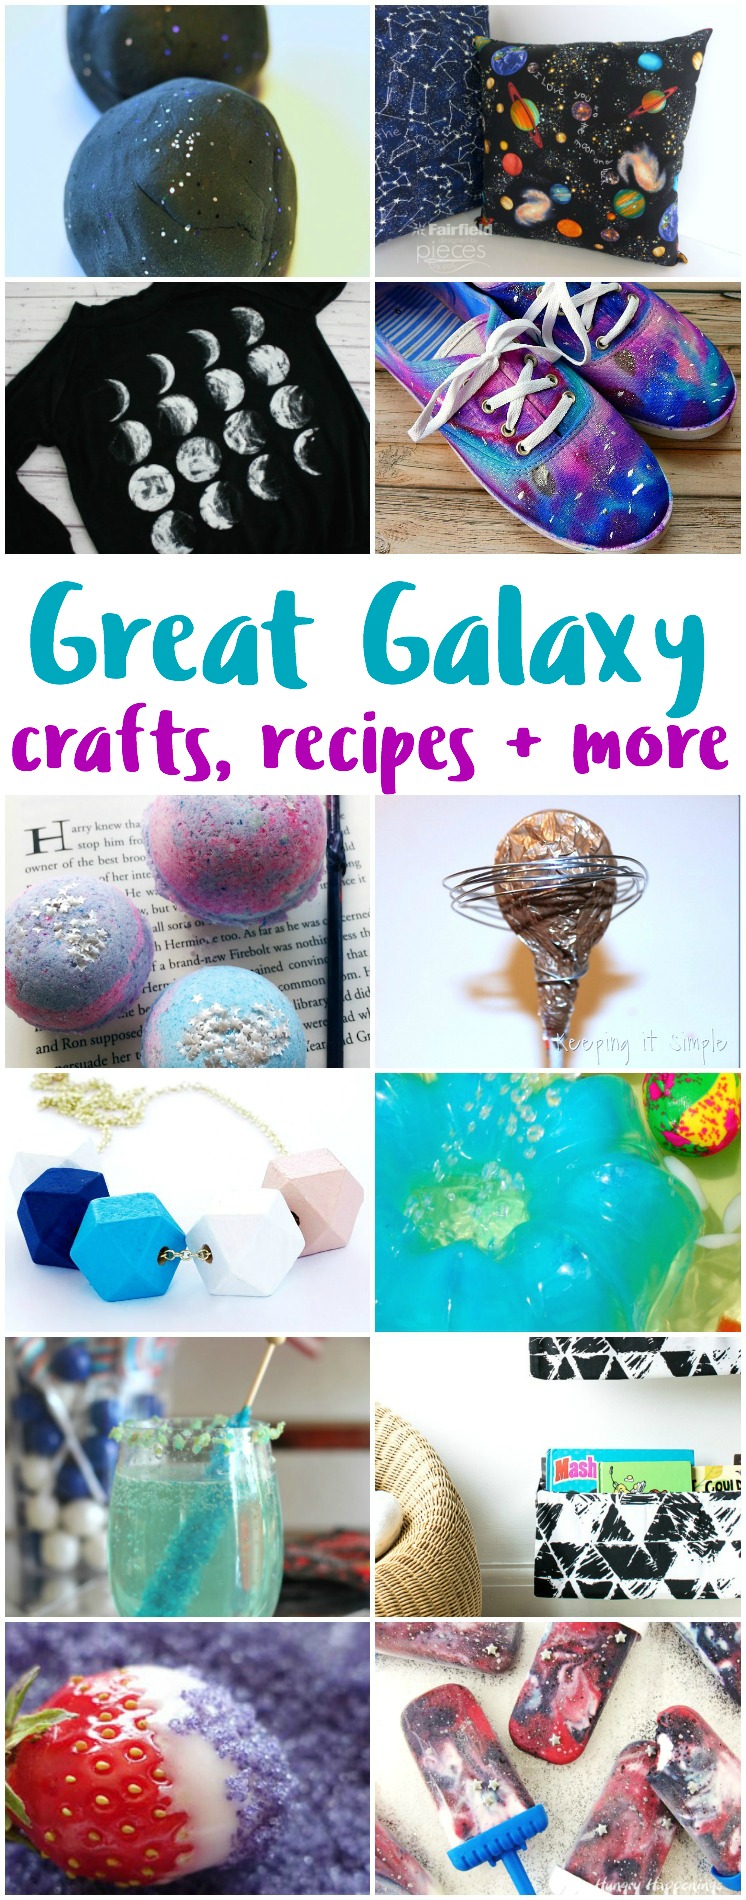 galaxy crafts recipes and other DIY space projects and tutorials